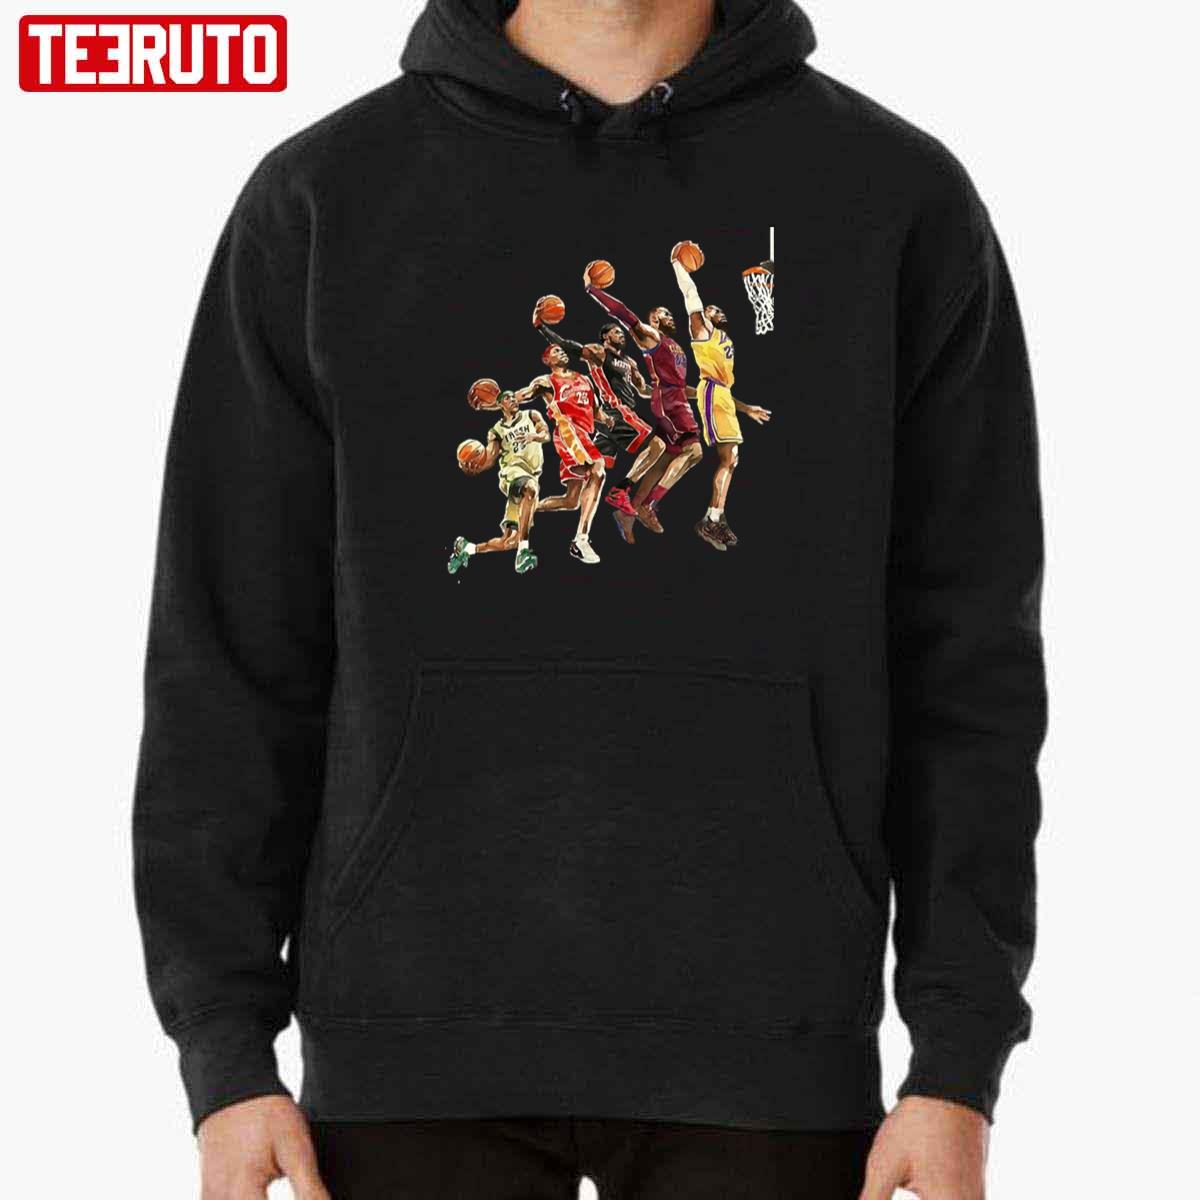 Los Angeles Lakers Hoodie 3D Full Size Up To 5xl - Teeruto